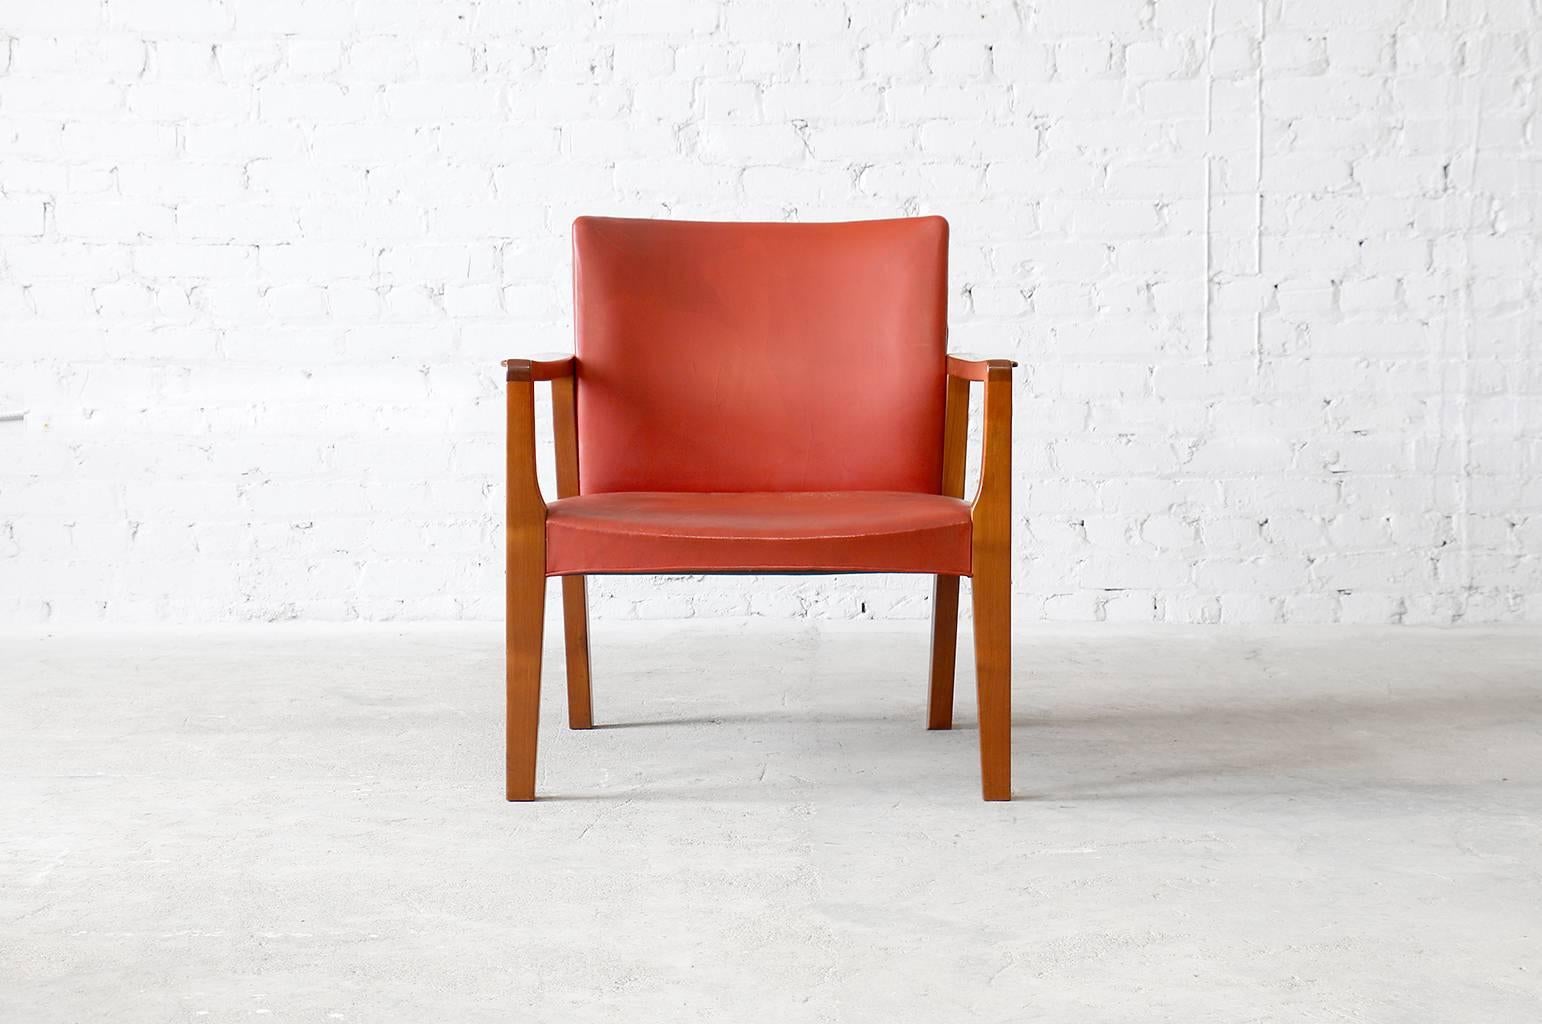 Rare and impressive vintage easy chair designed by Børge Christian Christoffersen for N.C. Christoffersen. One of two examples created and previously owned by Christoffersen's grandson. Quality construction and great provenance.

- One of two